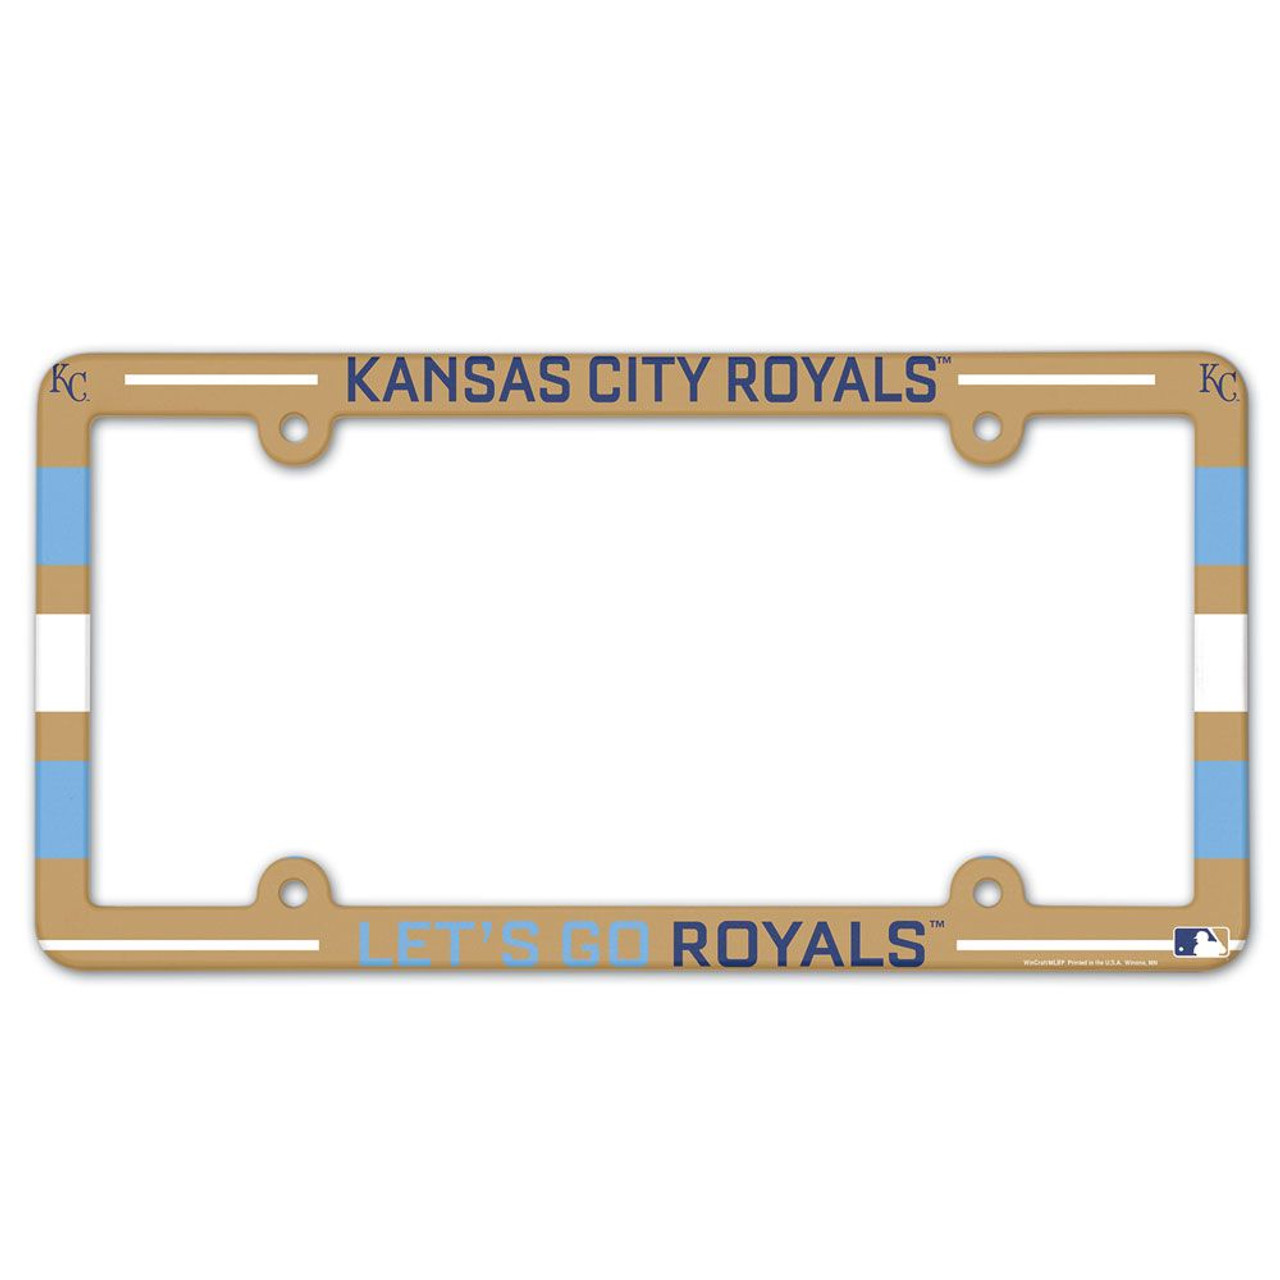 Wincraft Kansas City Royals License Plate Frame - Full Color